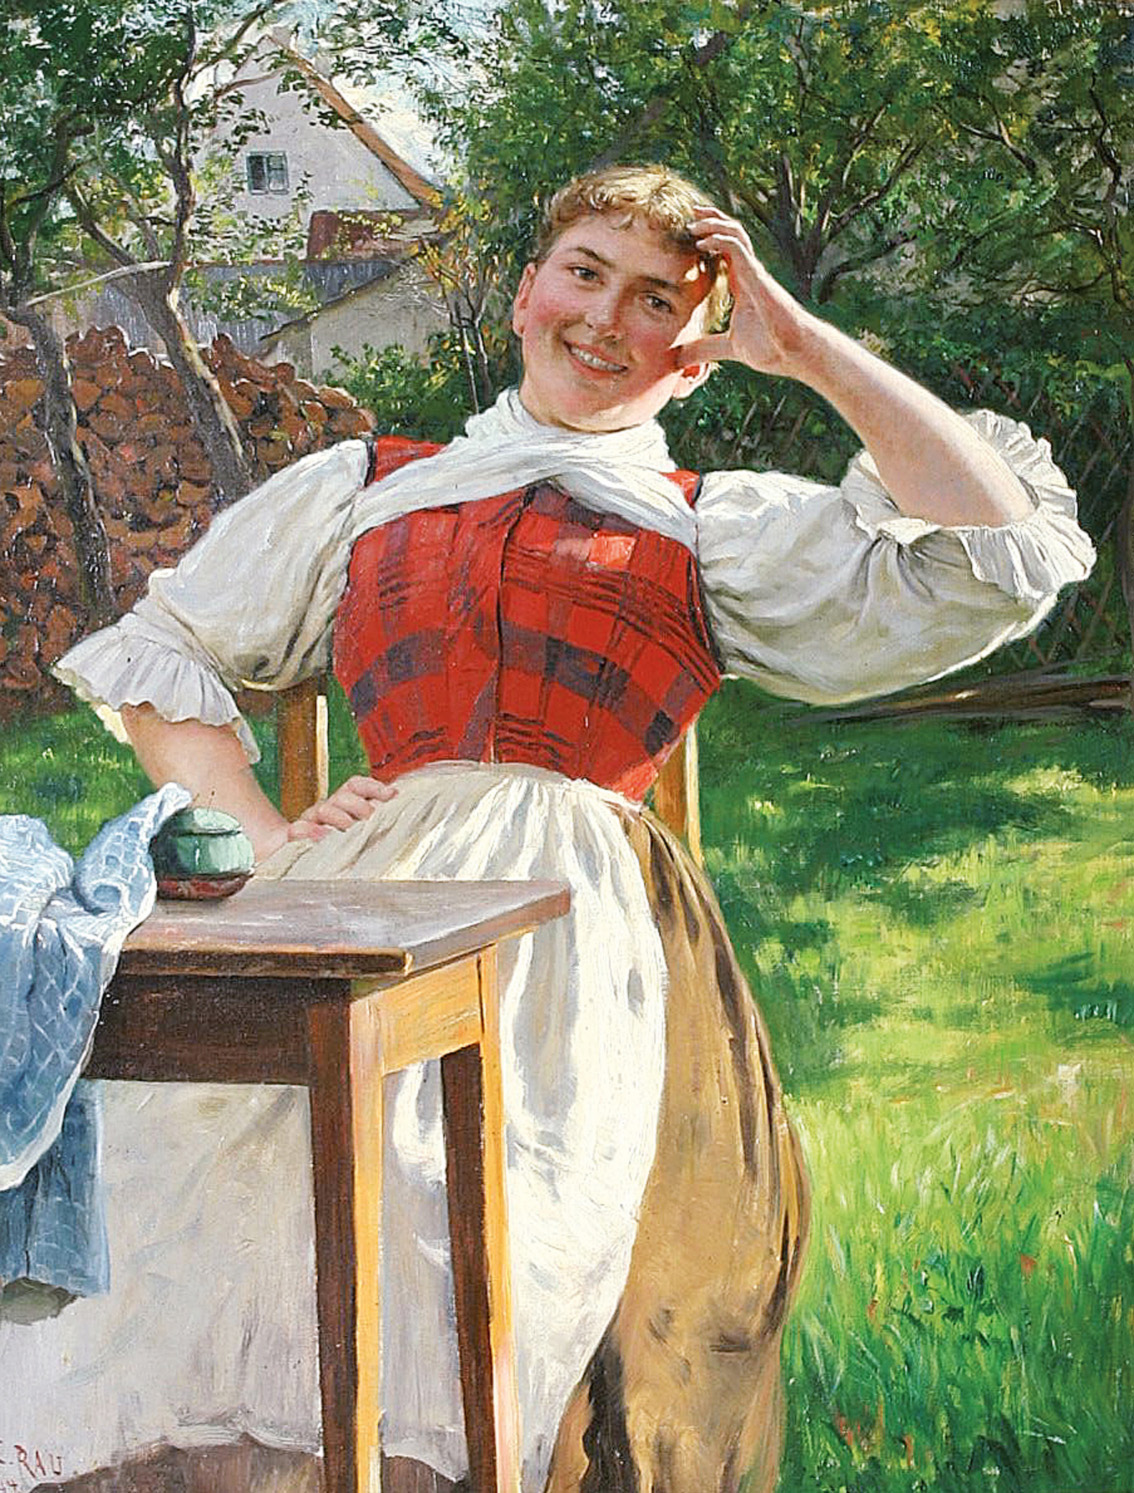 A young girl sewing in the garden